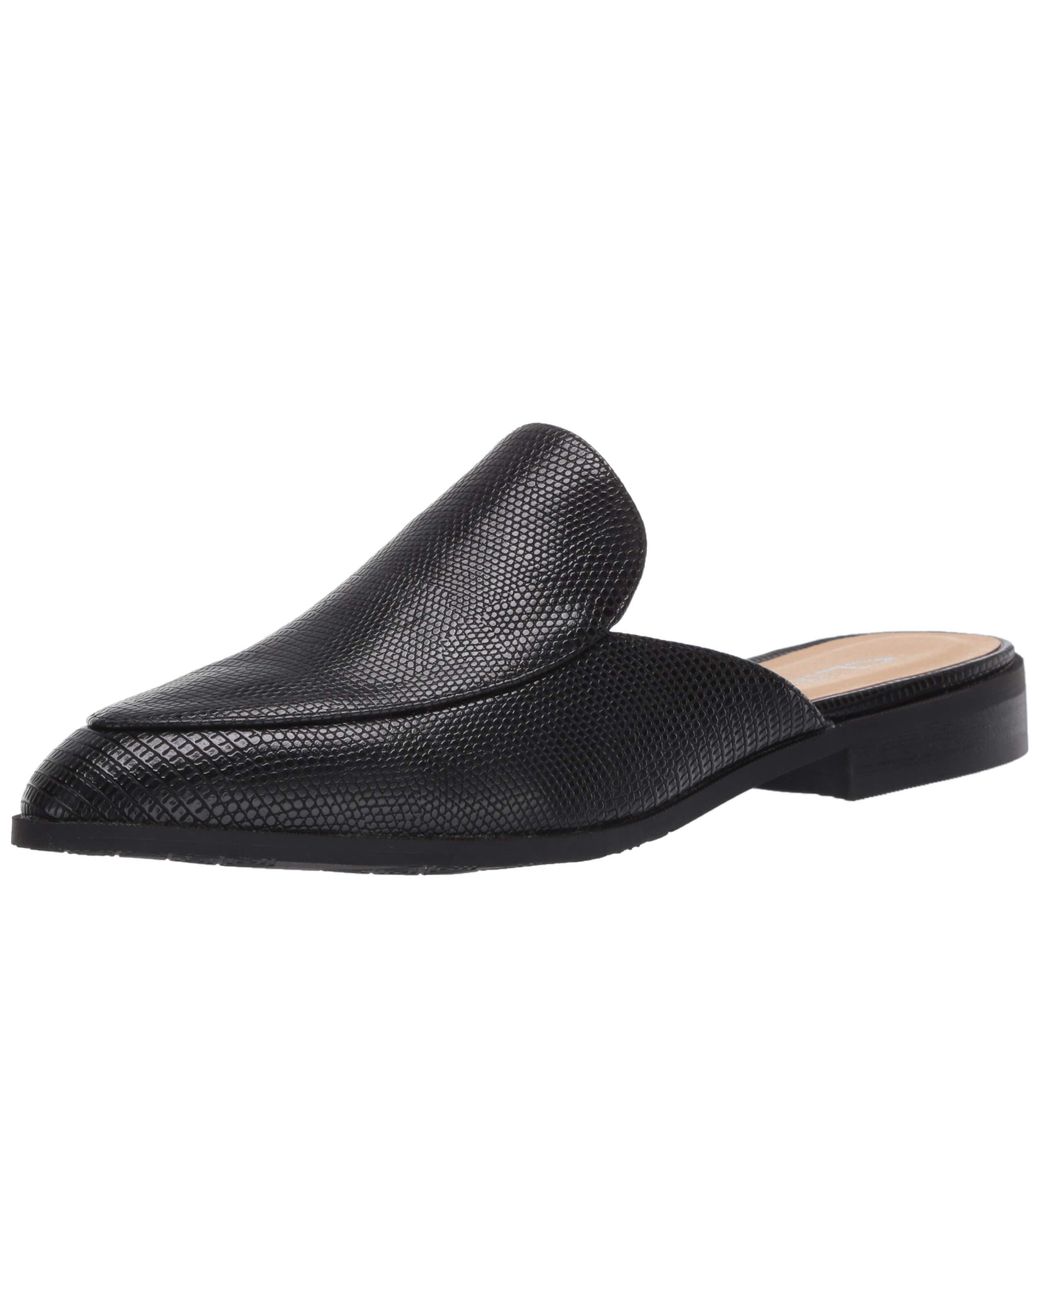 CL By Chinese Laundry Freshest Mule in Black - Lyst